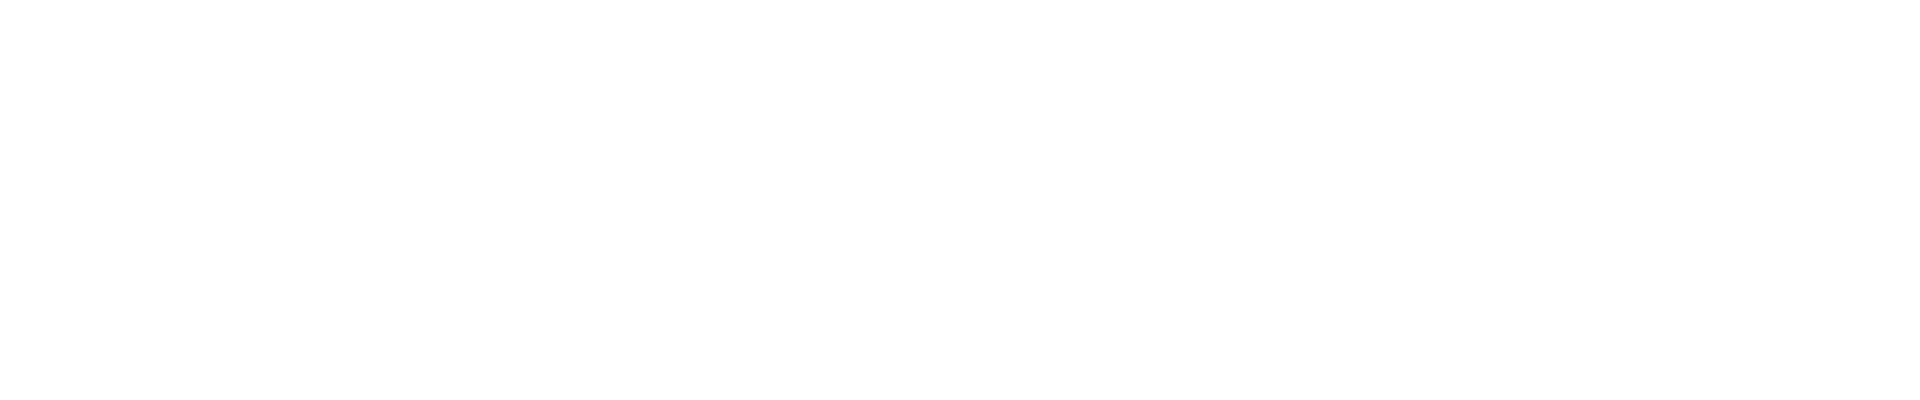 GlamStreet Careers Title.png